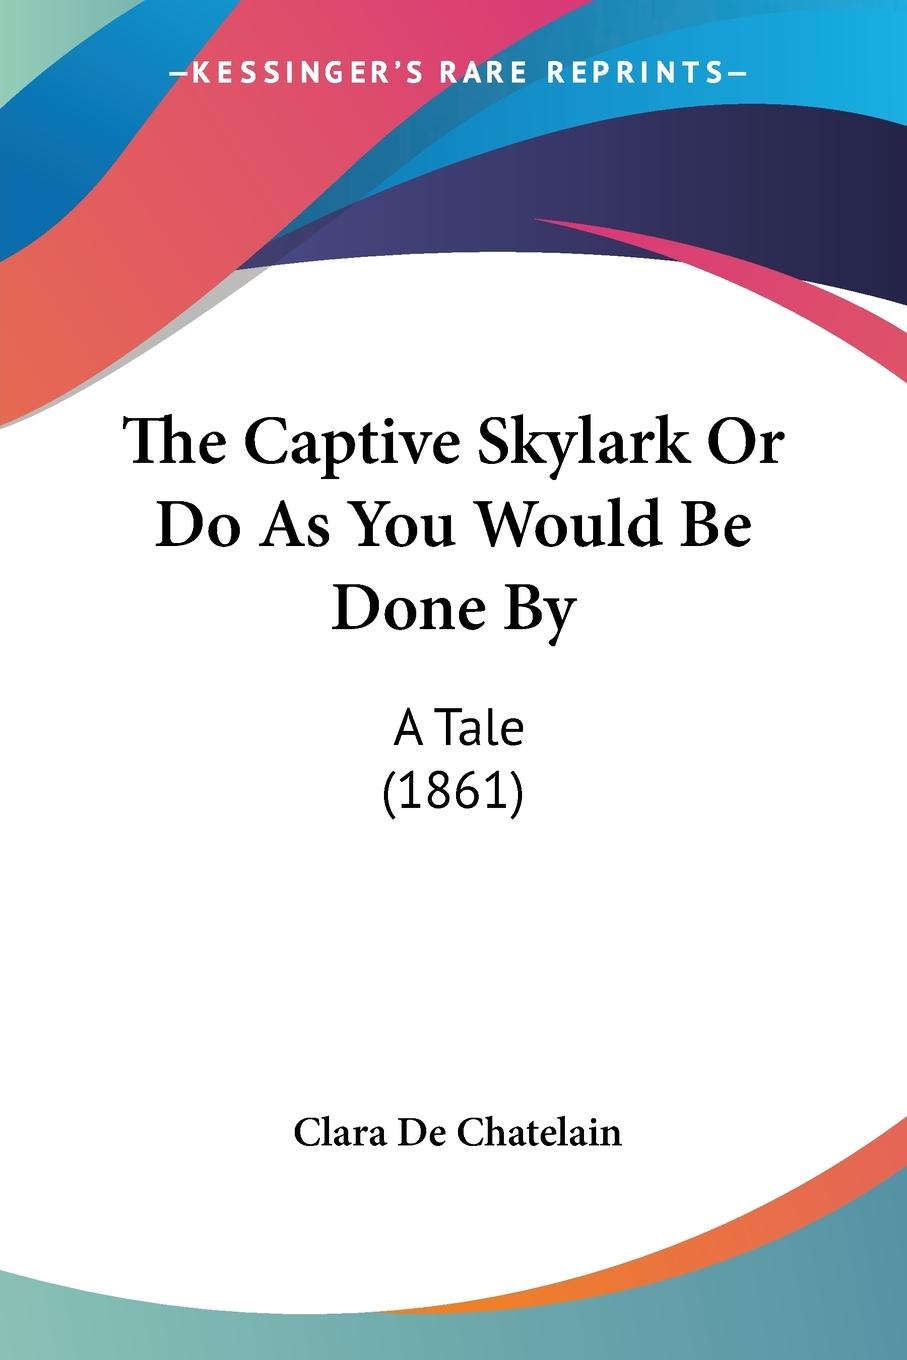 The Captive Skylark Or Do As You Would Be Done By - De Chatelain, Clara